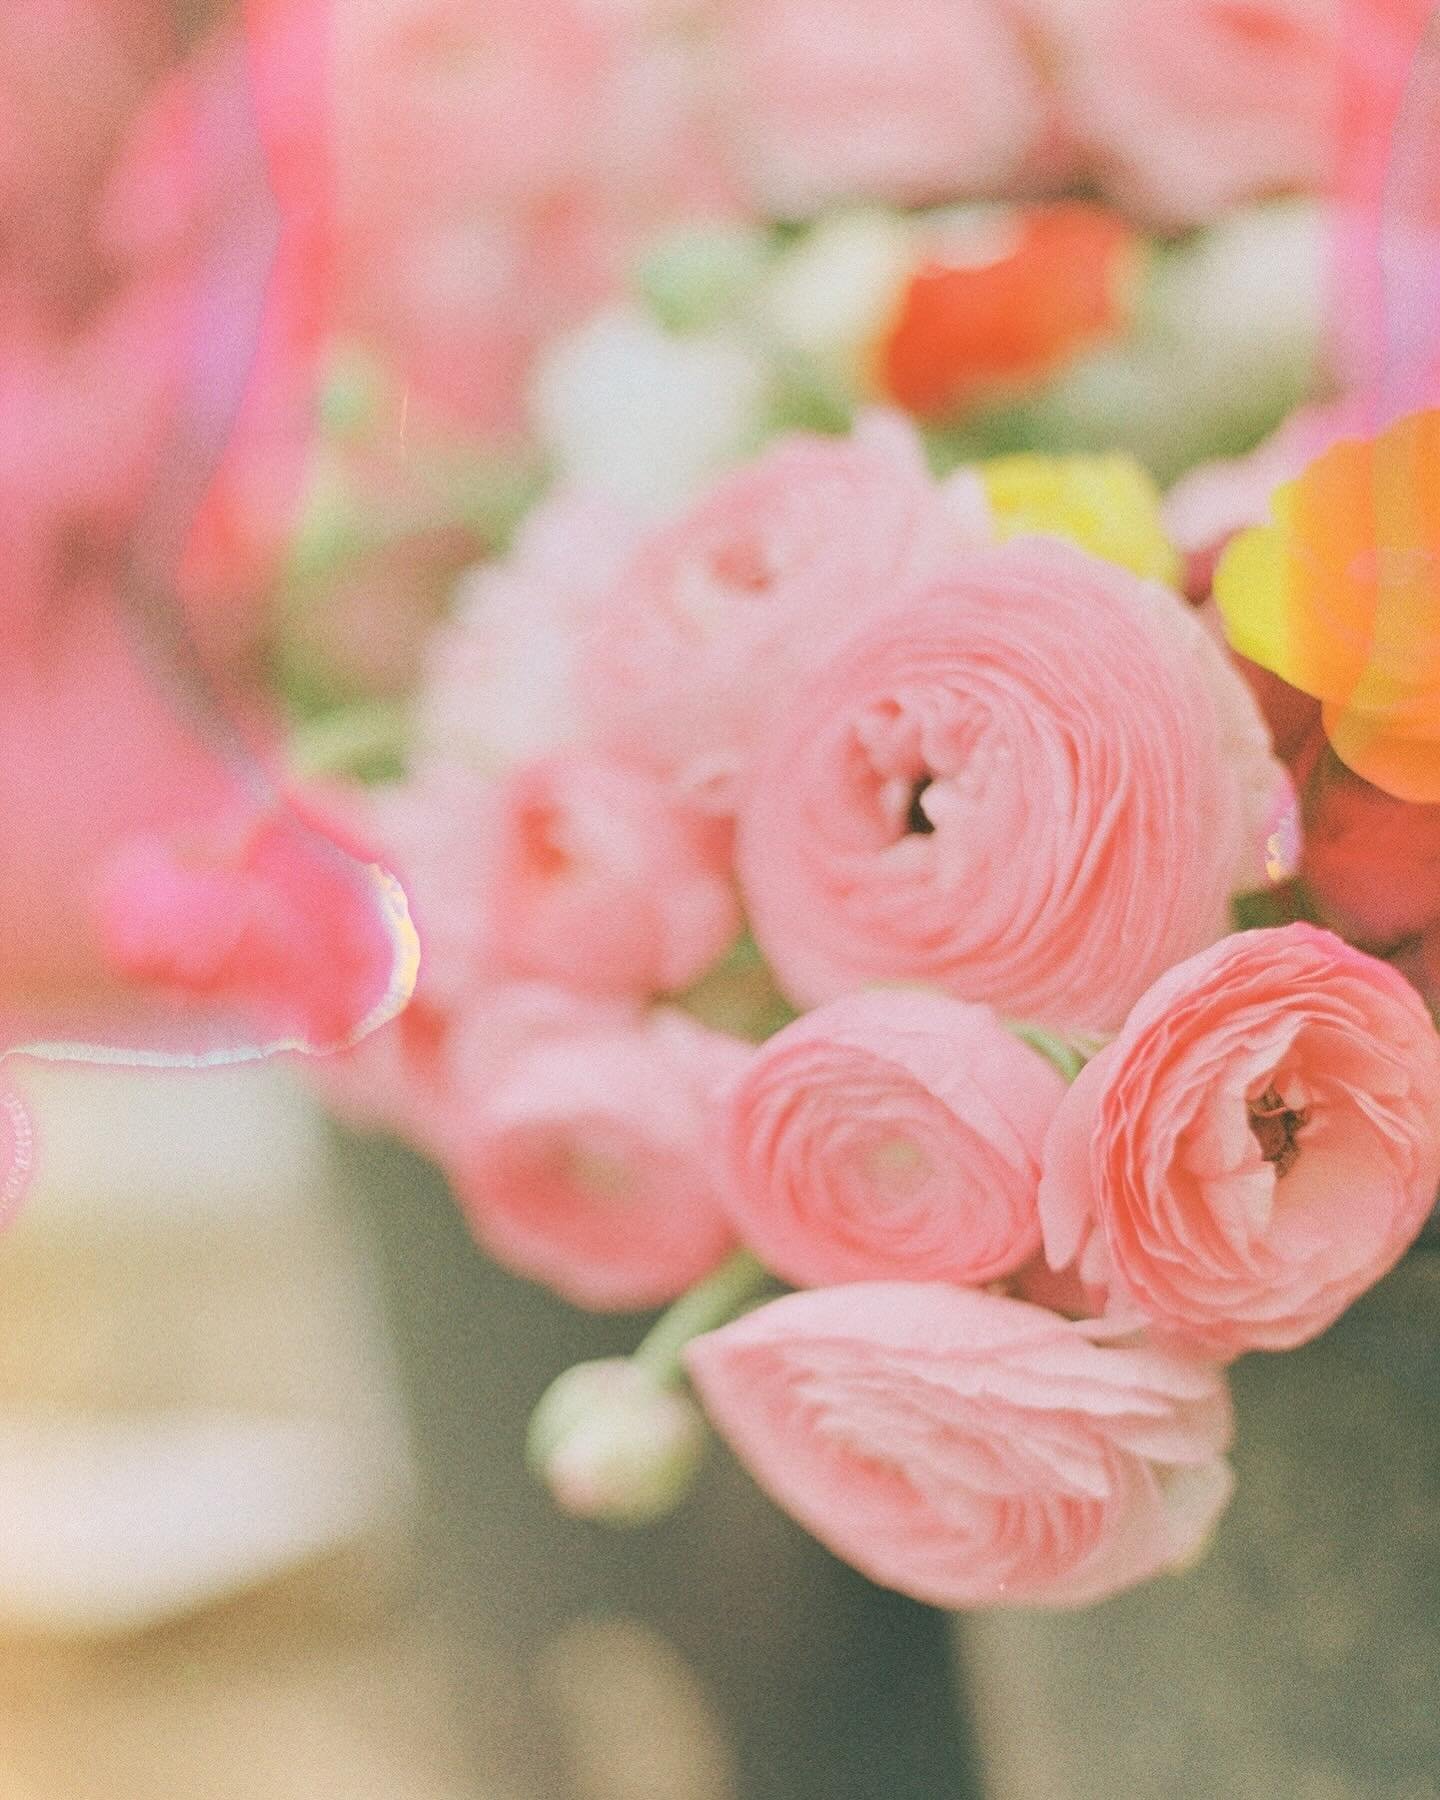 The most beautiful set of farmers market ranunculus. If I could manage to keep a bouquet of these on my table all year round, I don&rsquo;t think I would ever be sad 🥹

Also this roll of film soup is giving me happy 👏🏻 vibes, mostly because it alw